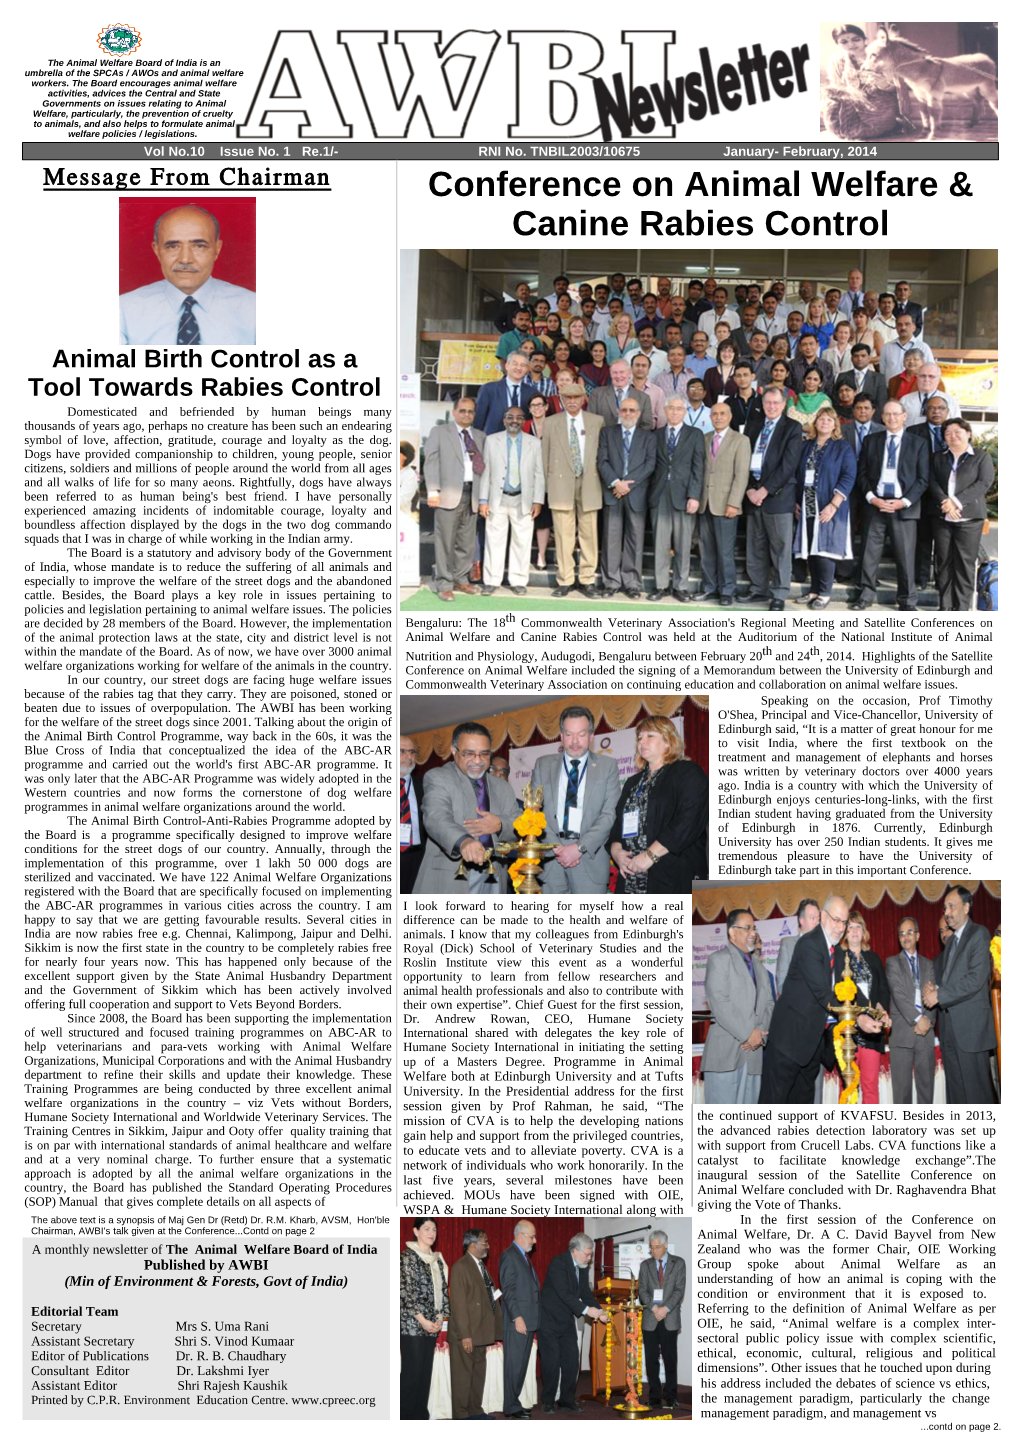 Conference on Animal Welfare & Canine Rabies Control